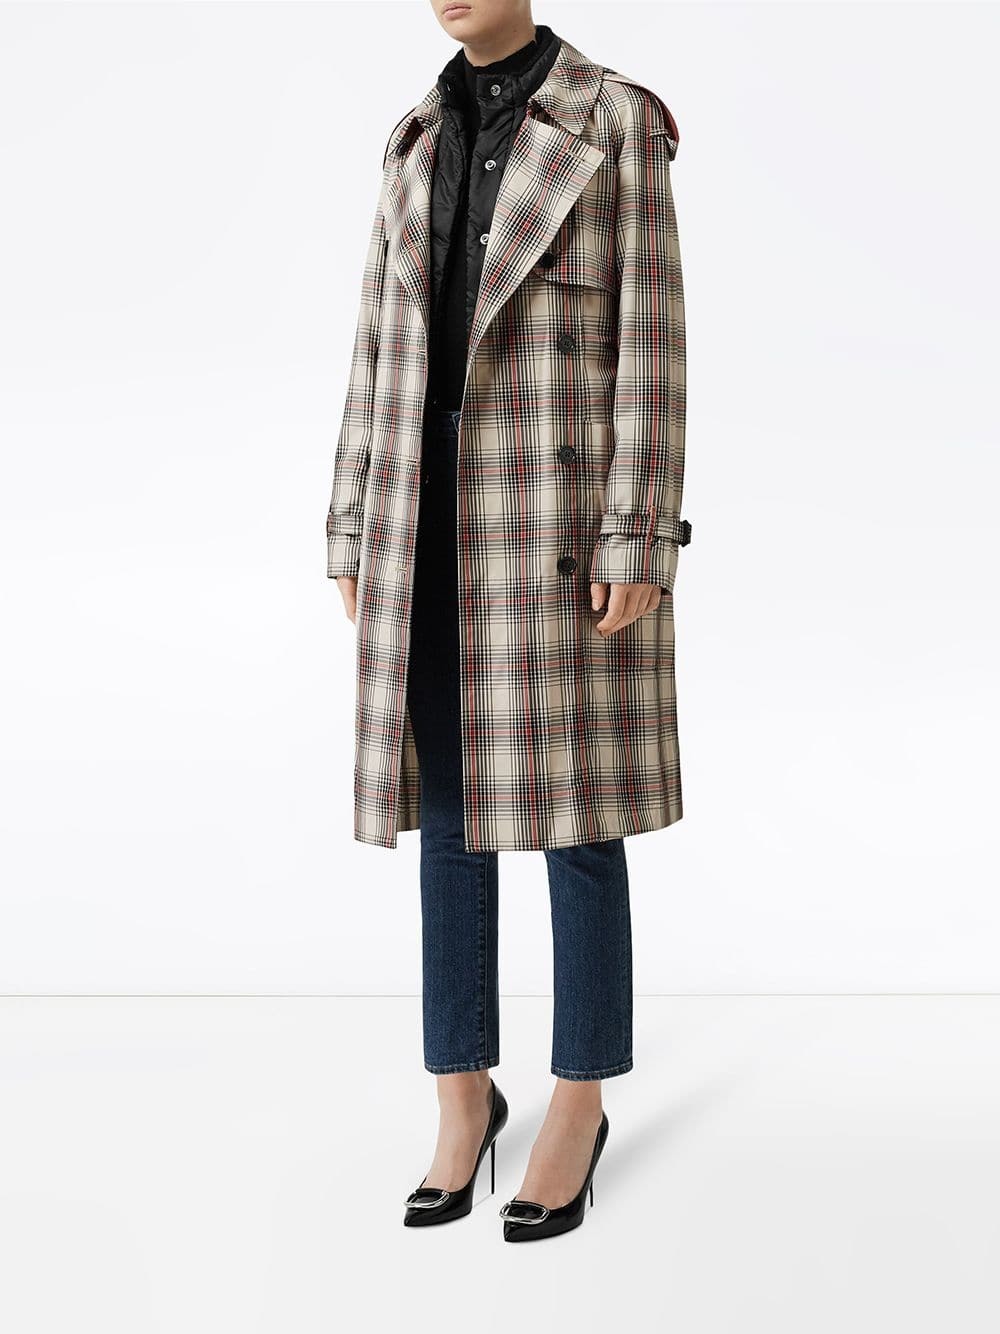 Burberry Lightweight Check Trench Coat, $1,087 | farfetch.com | Lookastic